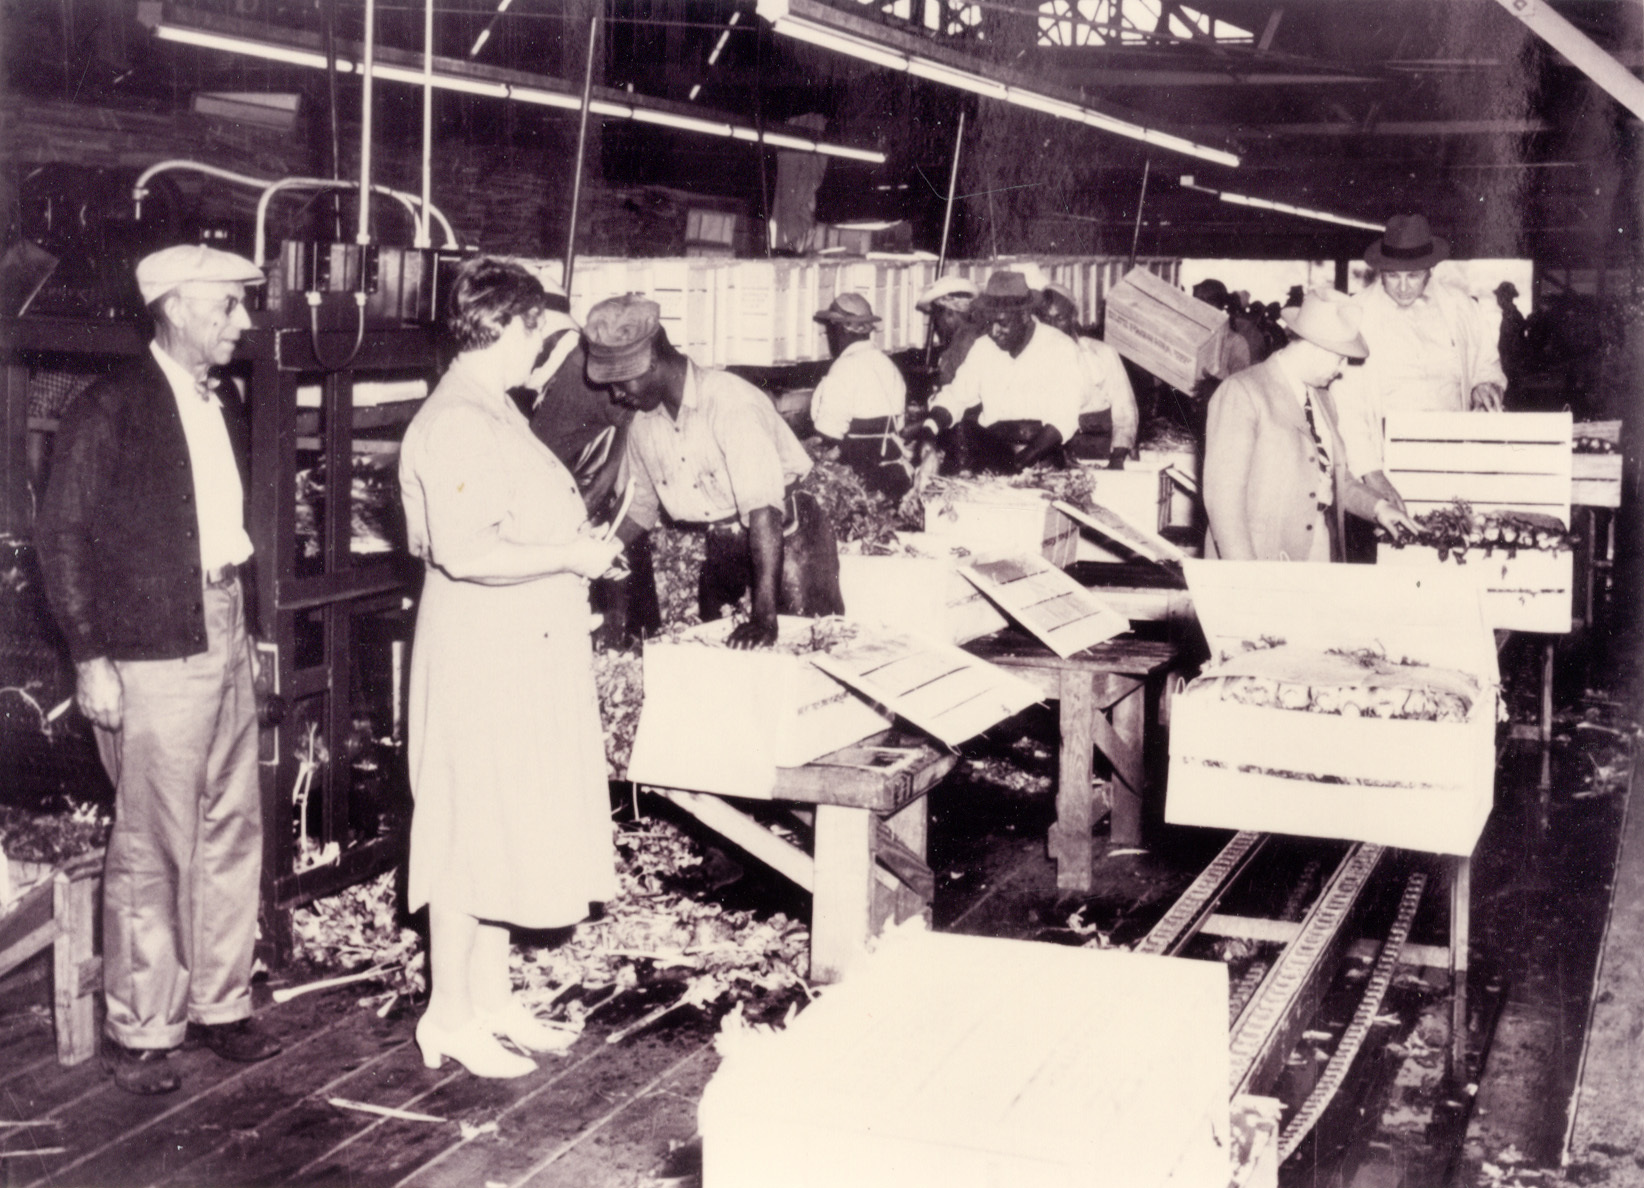 (Courtesy of Sarasota County Historical Resources, Tom Bell Collection) Laborers pack celery in the Old Packinghouse.